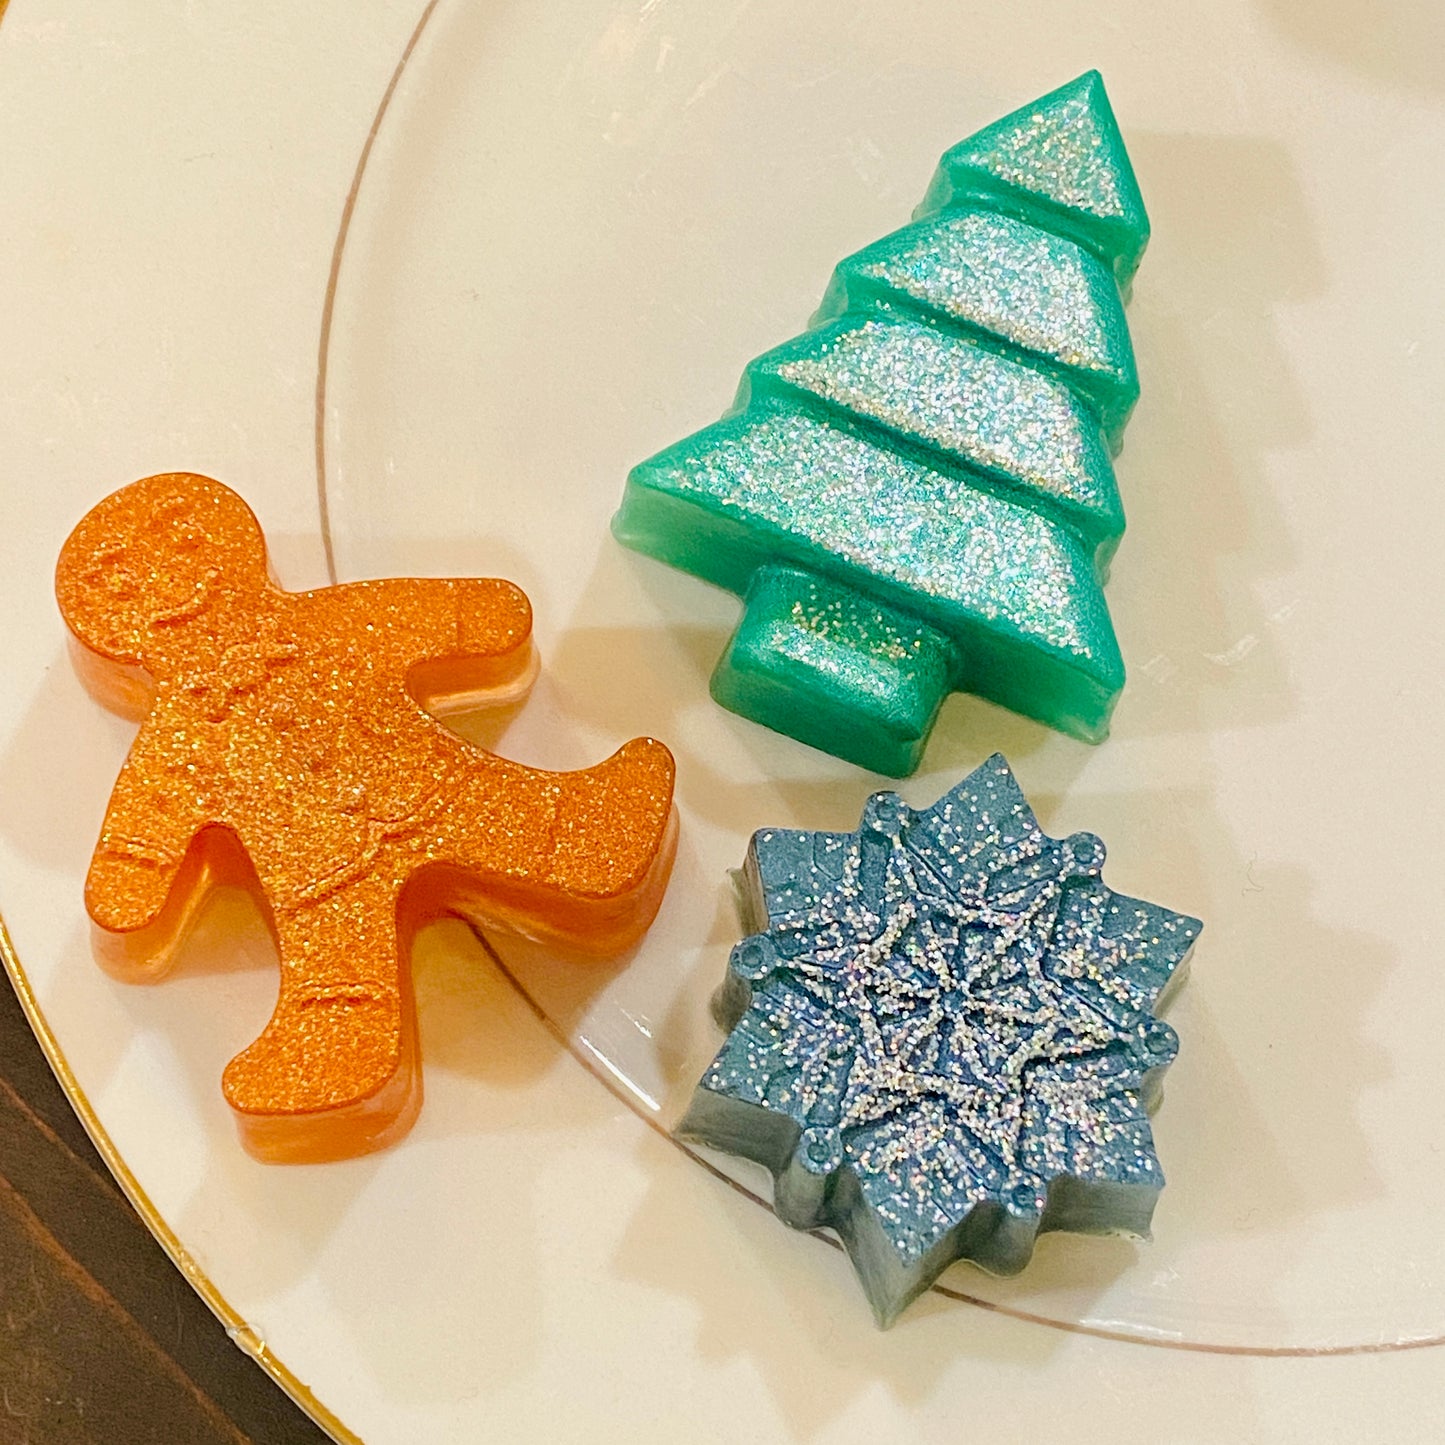 In-House fun-shaped soaps - Bundled of 3